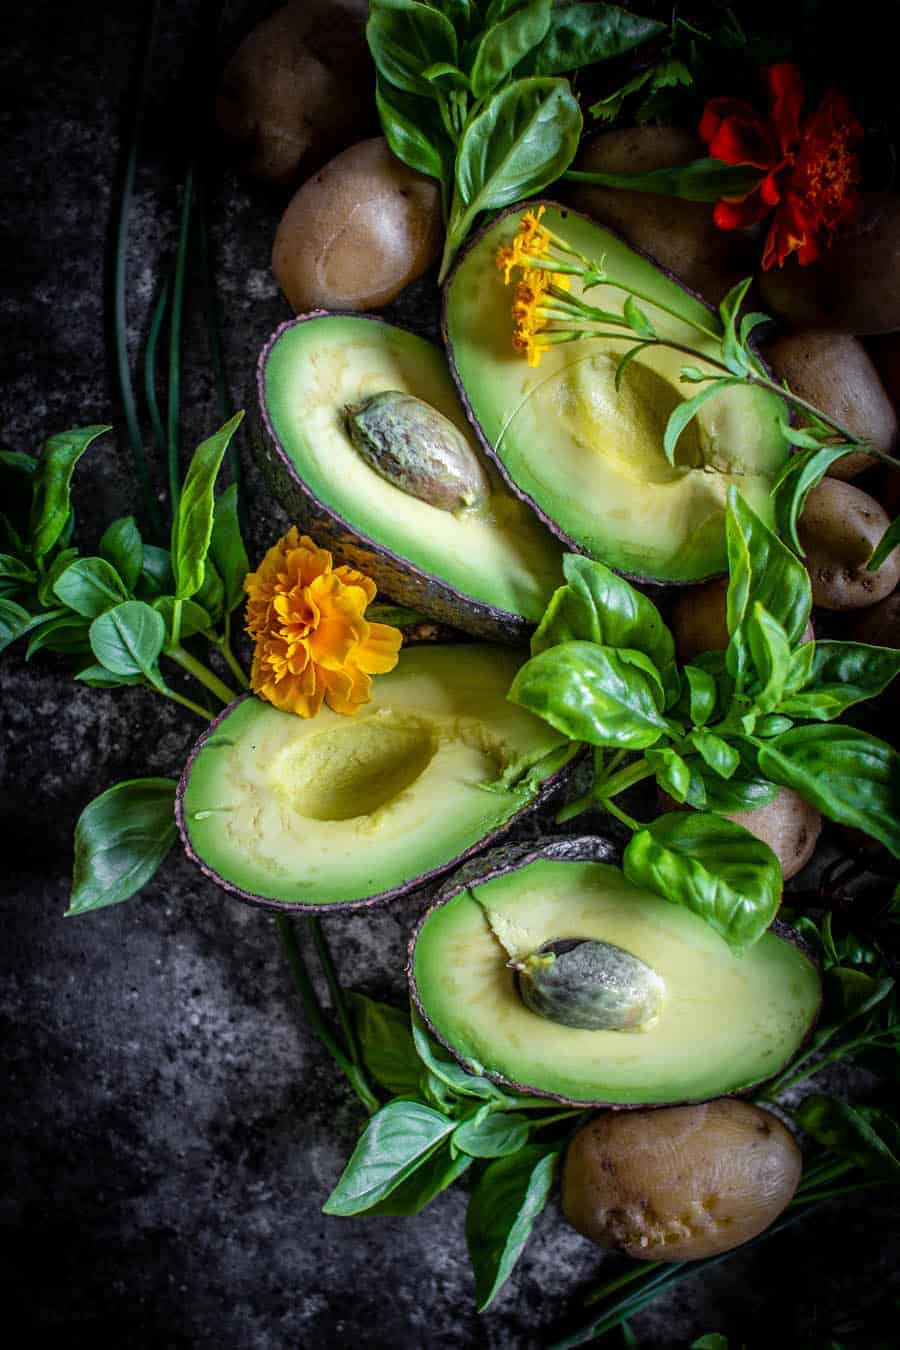 California Avocados image from This Mess is Ours